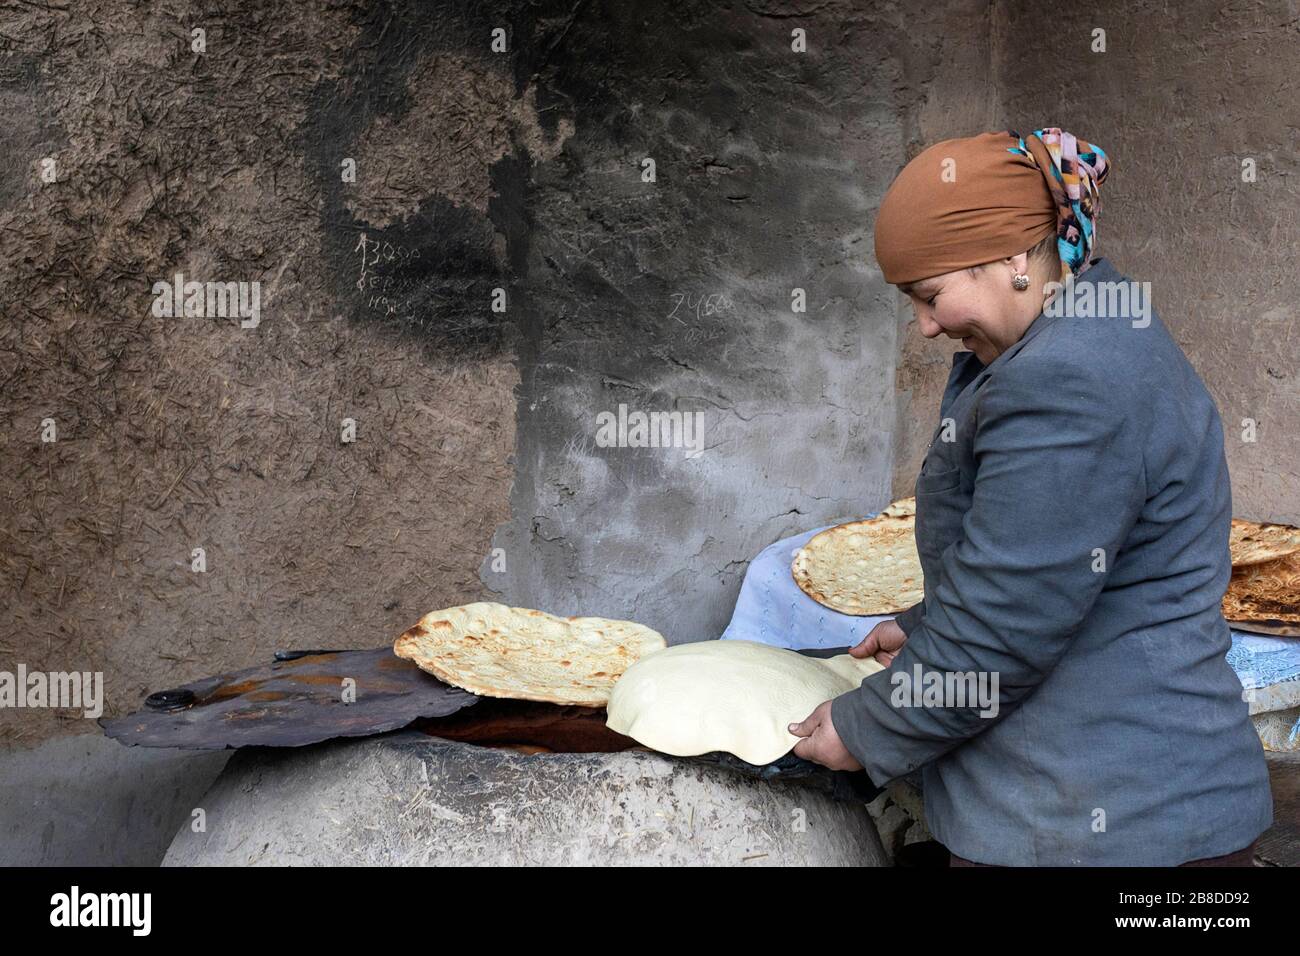 A Local Woman Bakes traditional Bread In A Traditional Clay Oven, Khiva, Uzbekistan Stock Photo